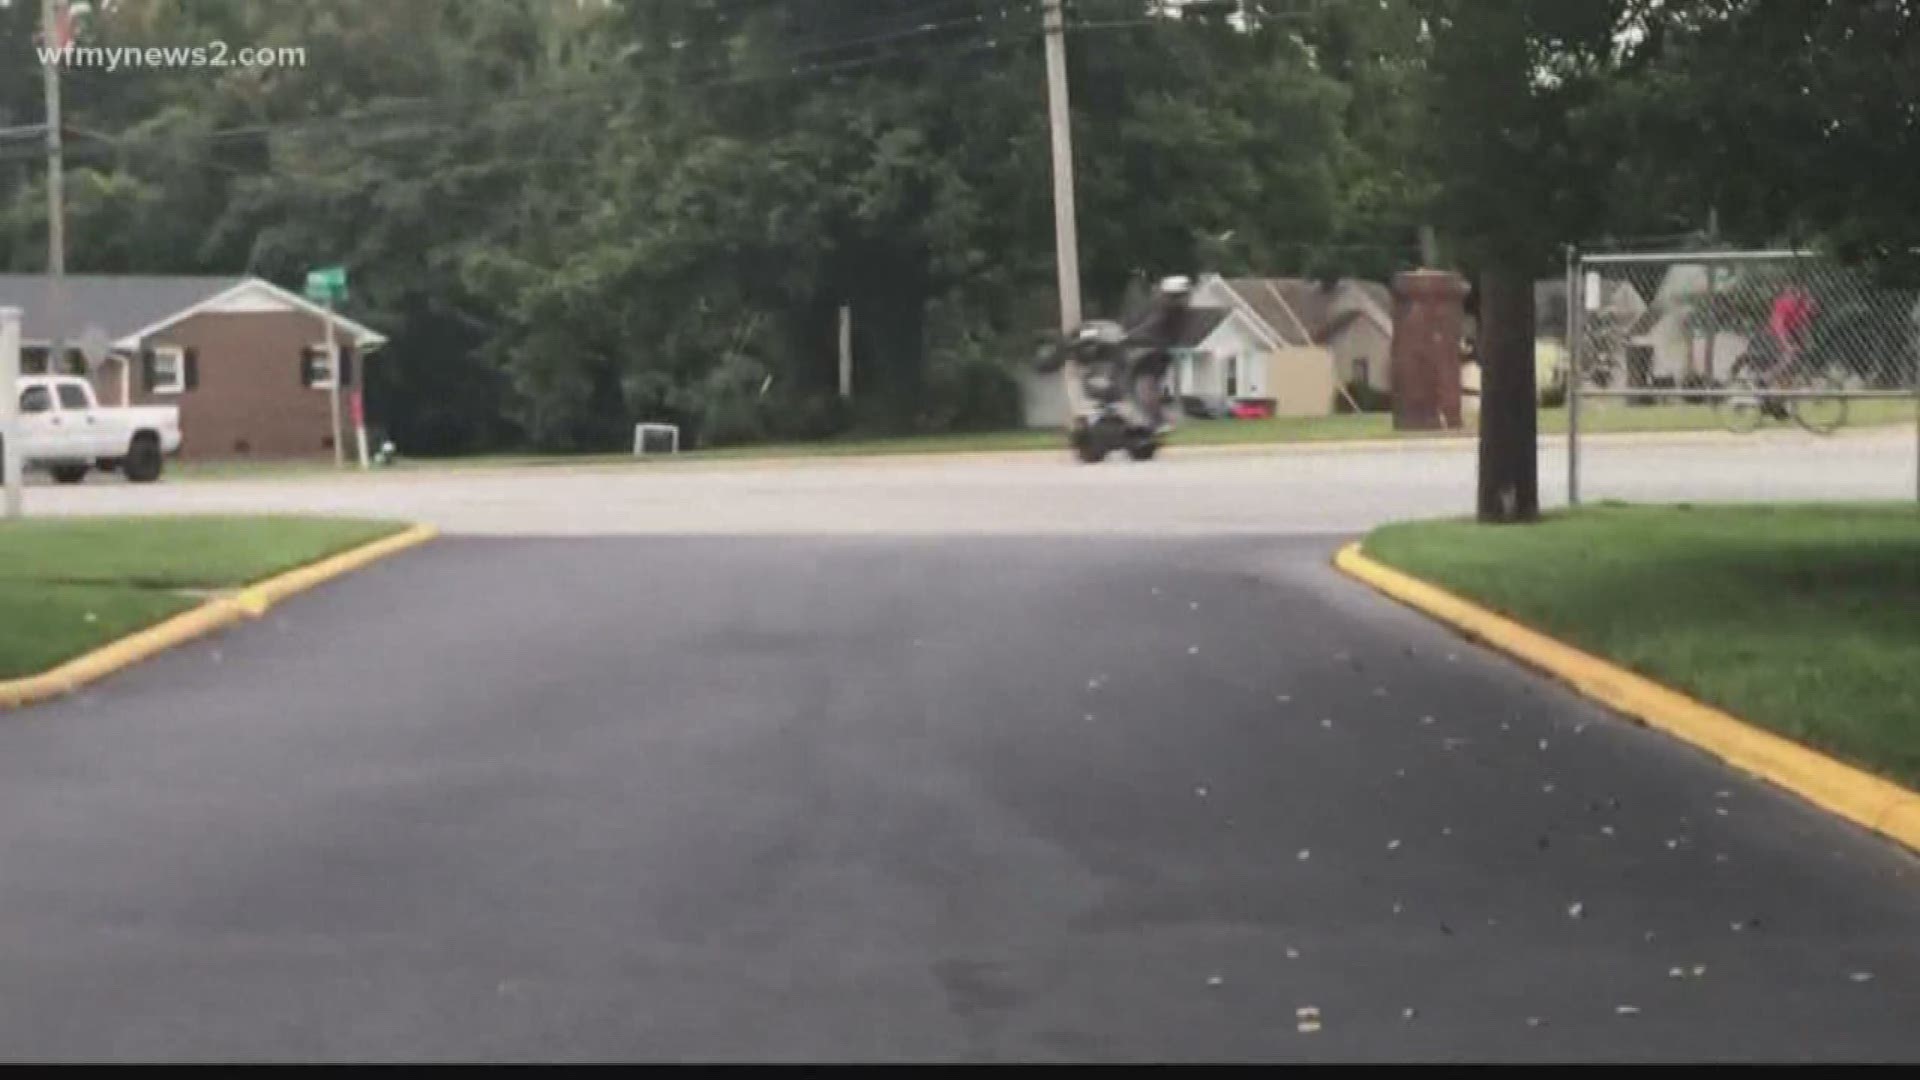 Greensboro Police say ATV's are not street legal. Scott Till says he constantly sees ATVs and dirt bikes driving recklessly where they shouldn't be.